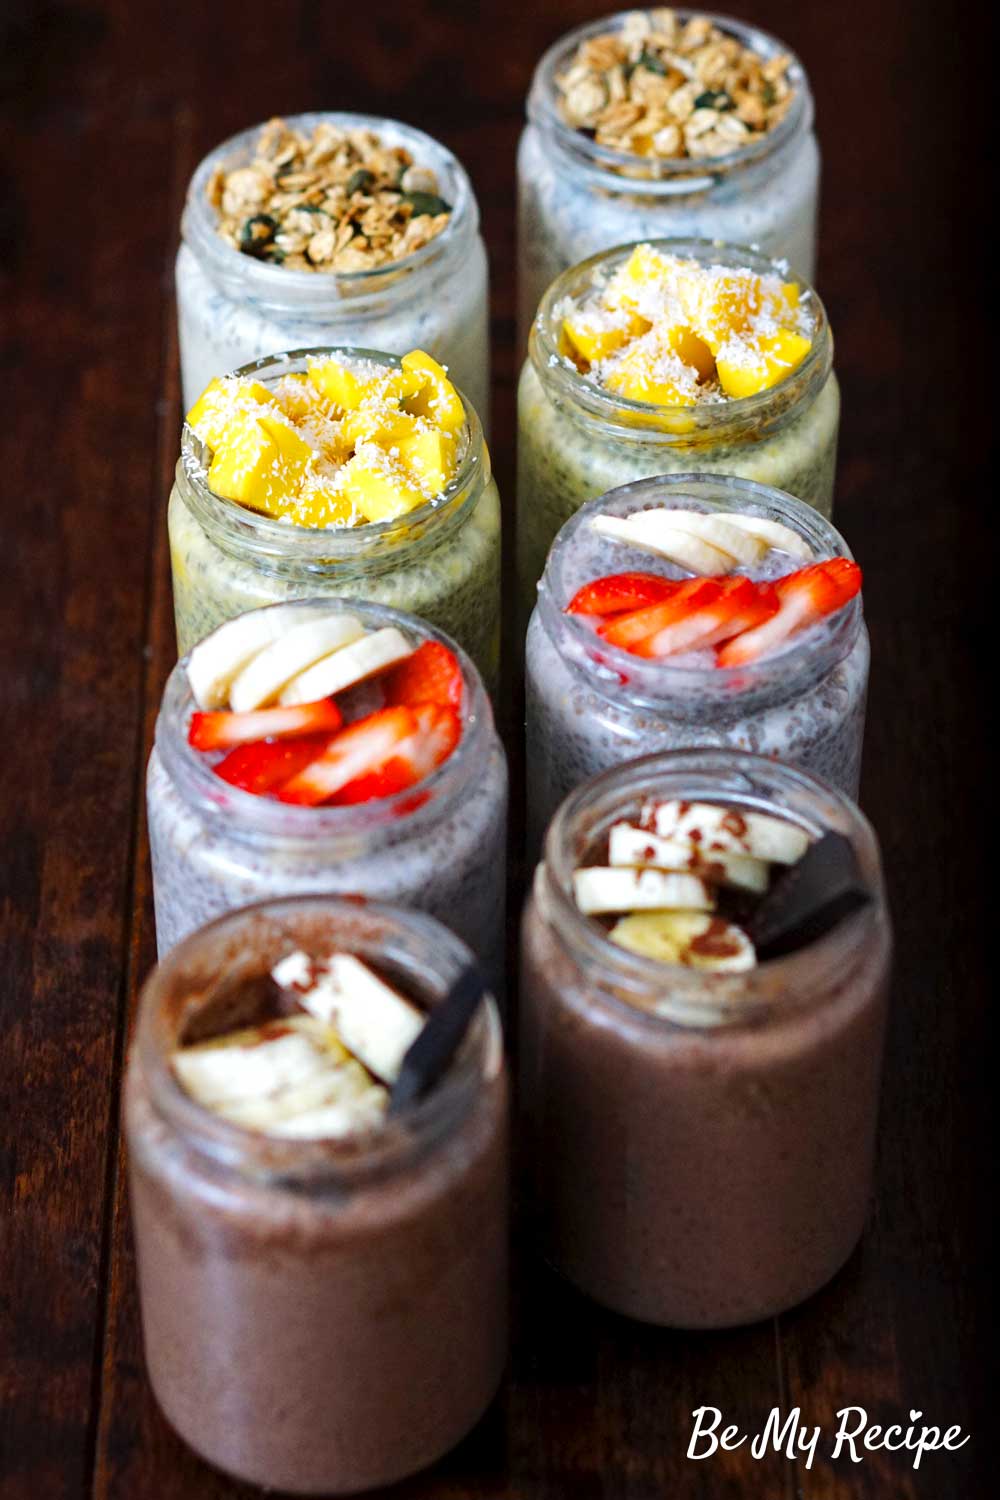 7 Chia Pudding Recipes for Quick and Nourishing Snacks To Go